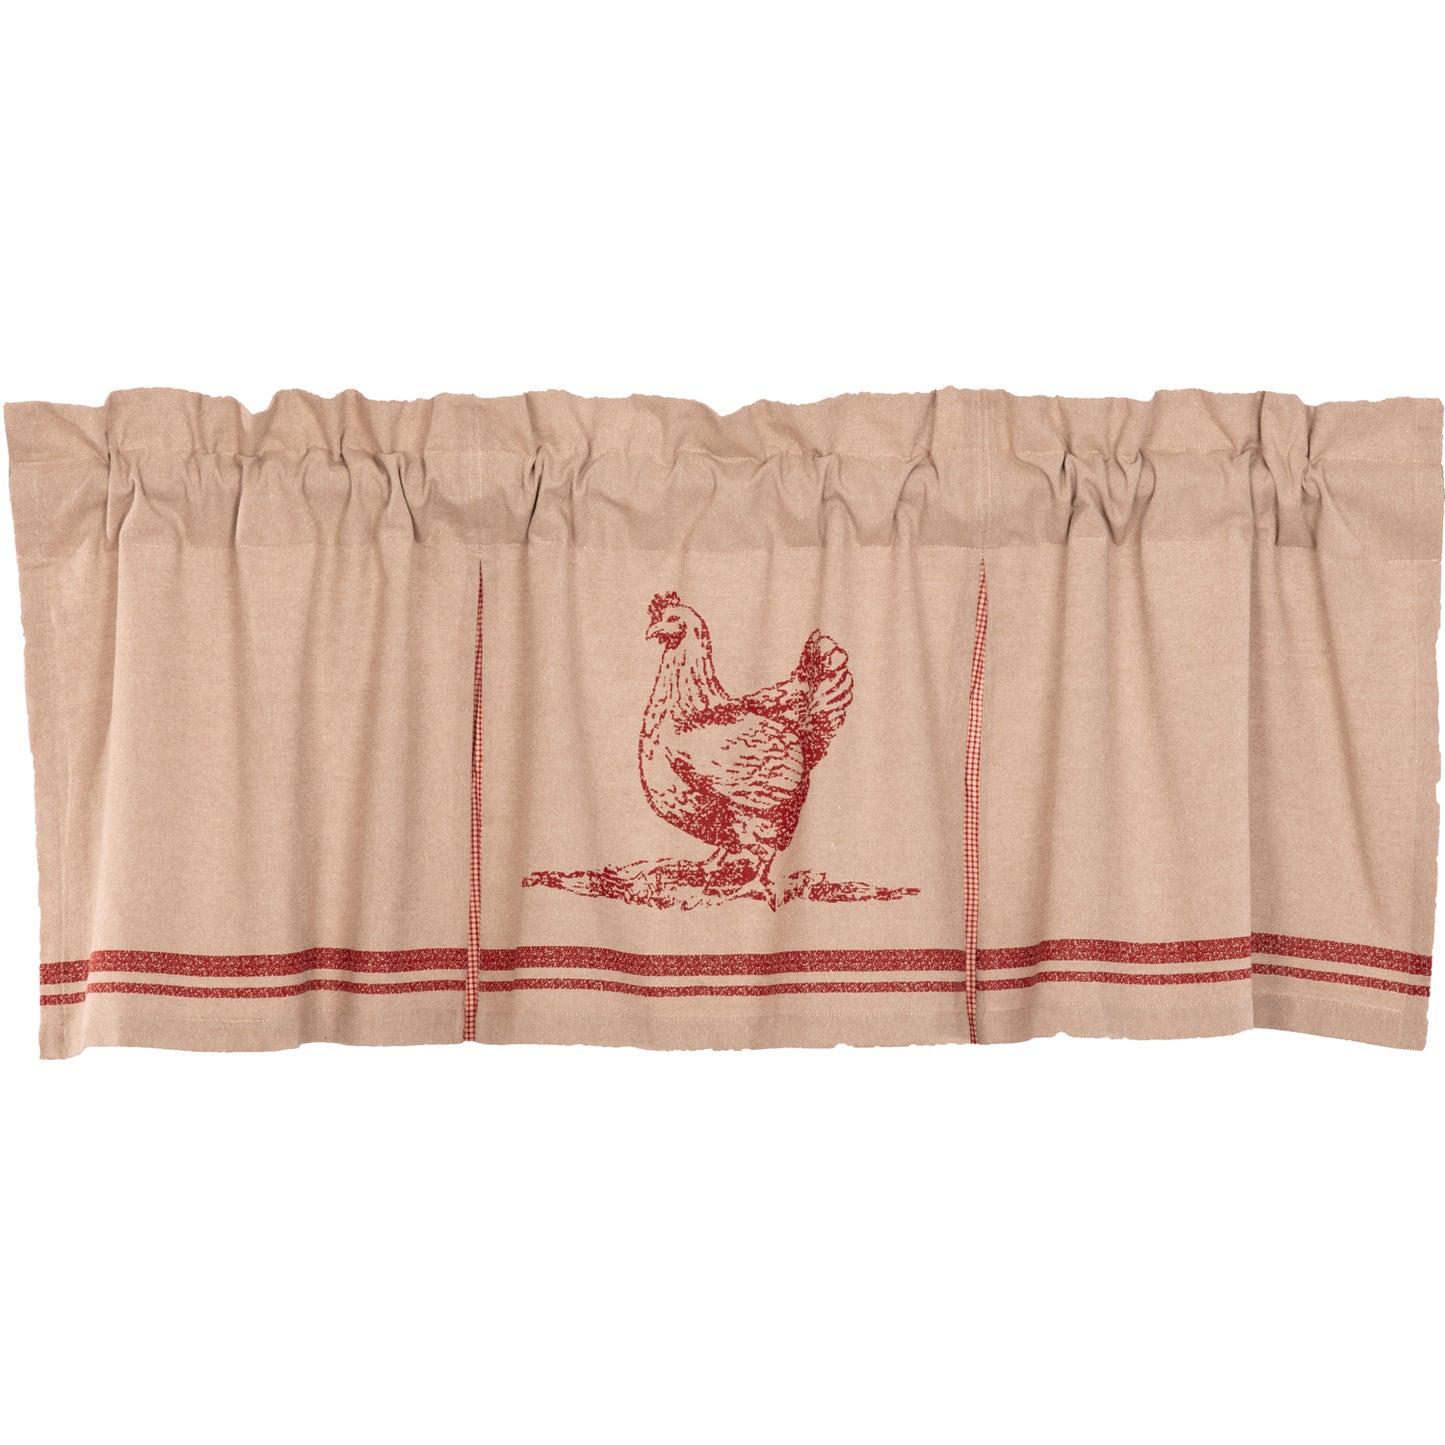 51967-Sawyer-Mill-Red-Chicken-Valance-Pleated-20x60-image-6